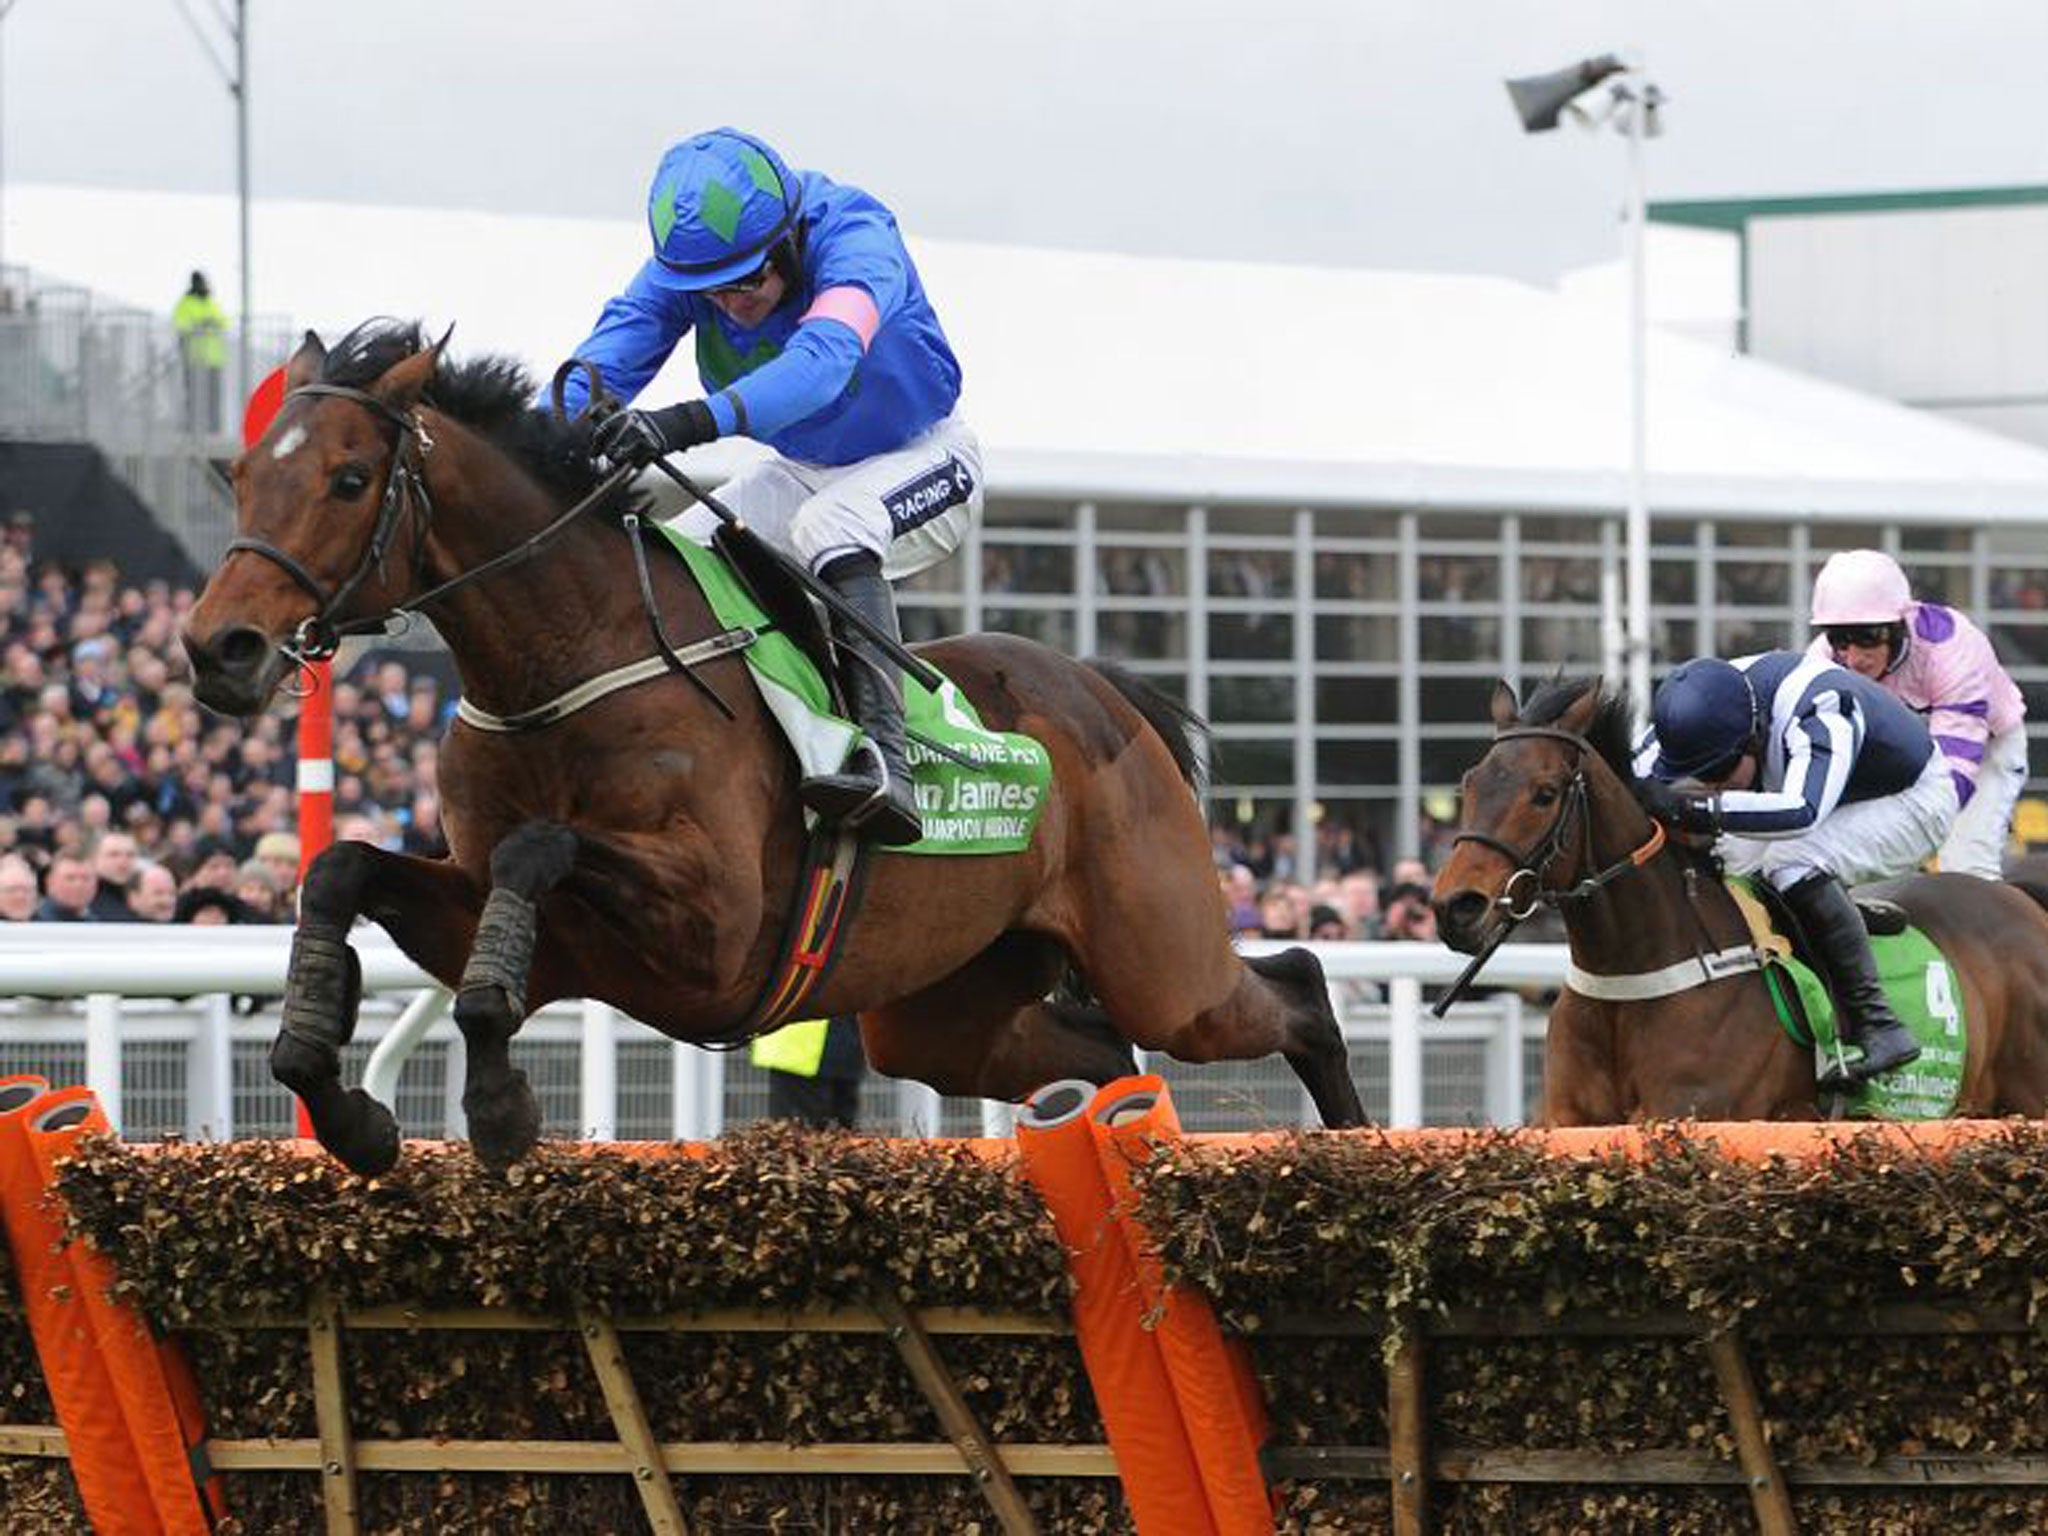 Hurricane Fly, with Ruby Walsh up, jumps the last flight on his way to victory in the Champion Hurdle